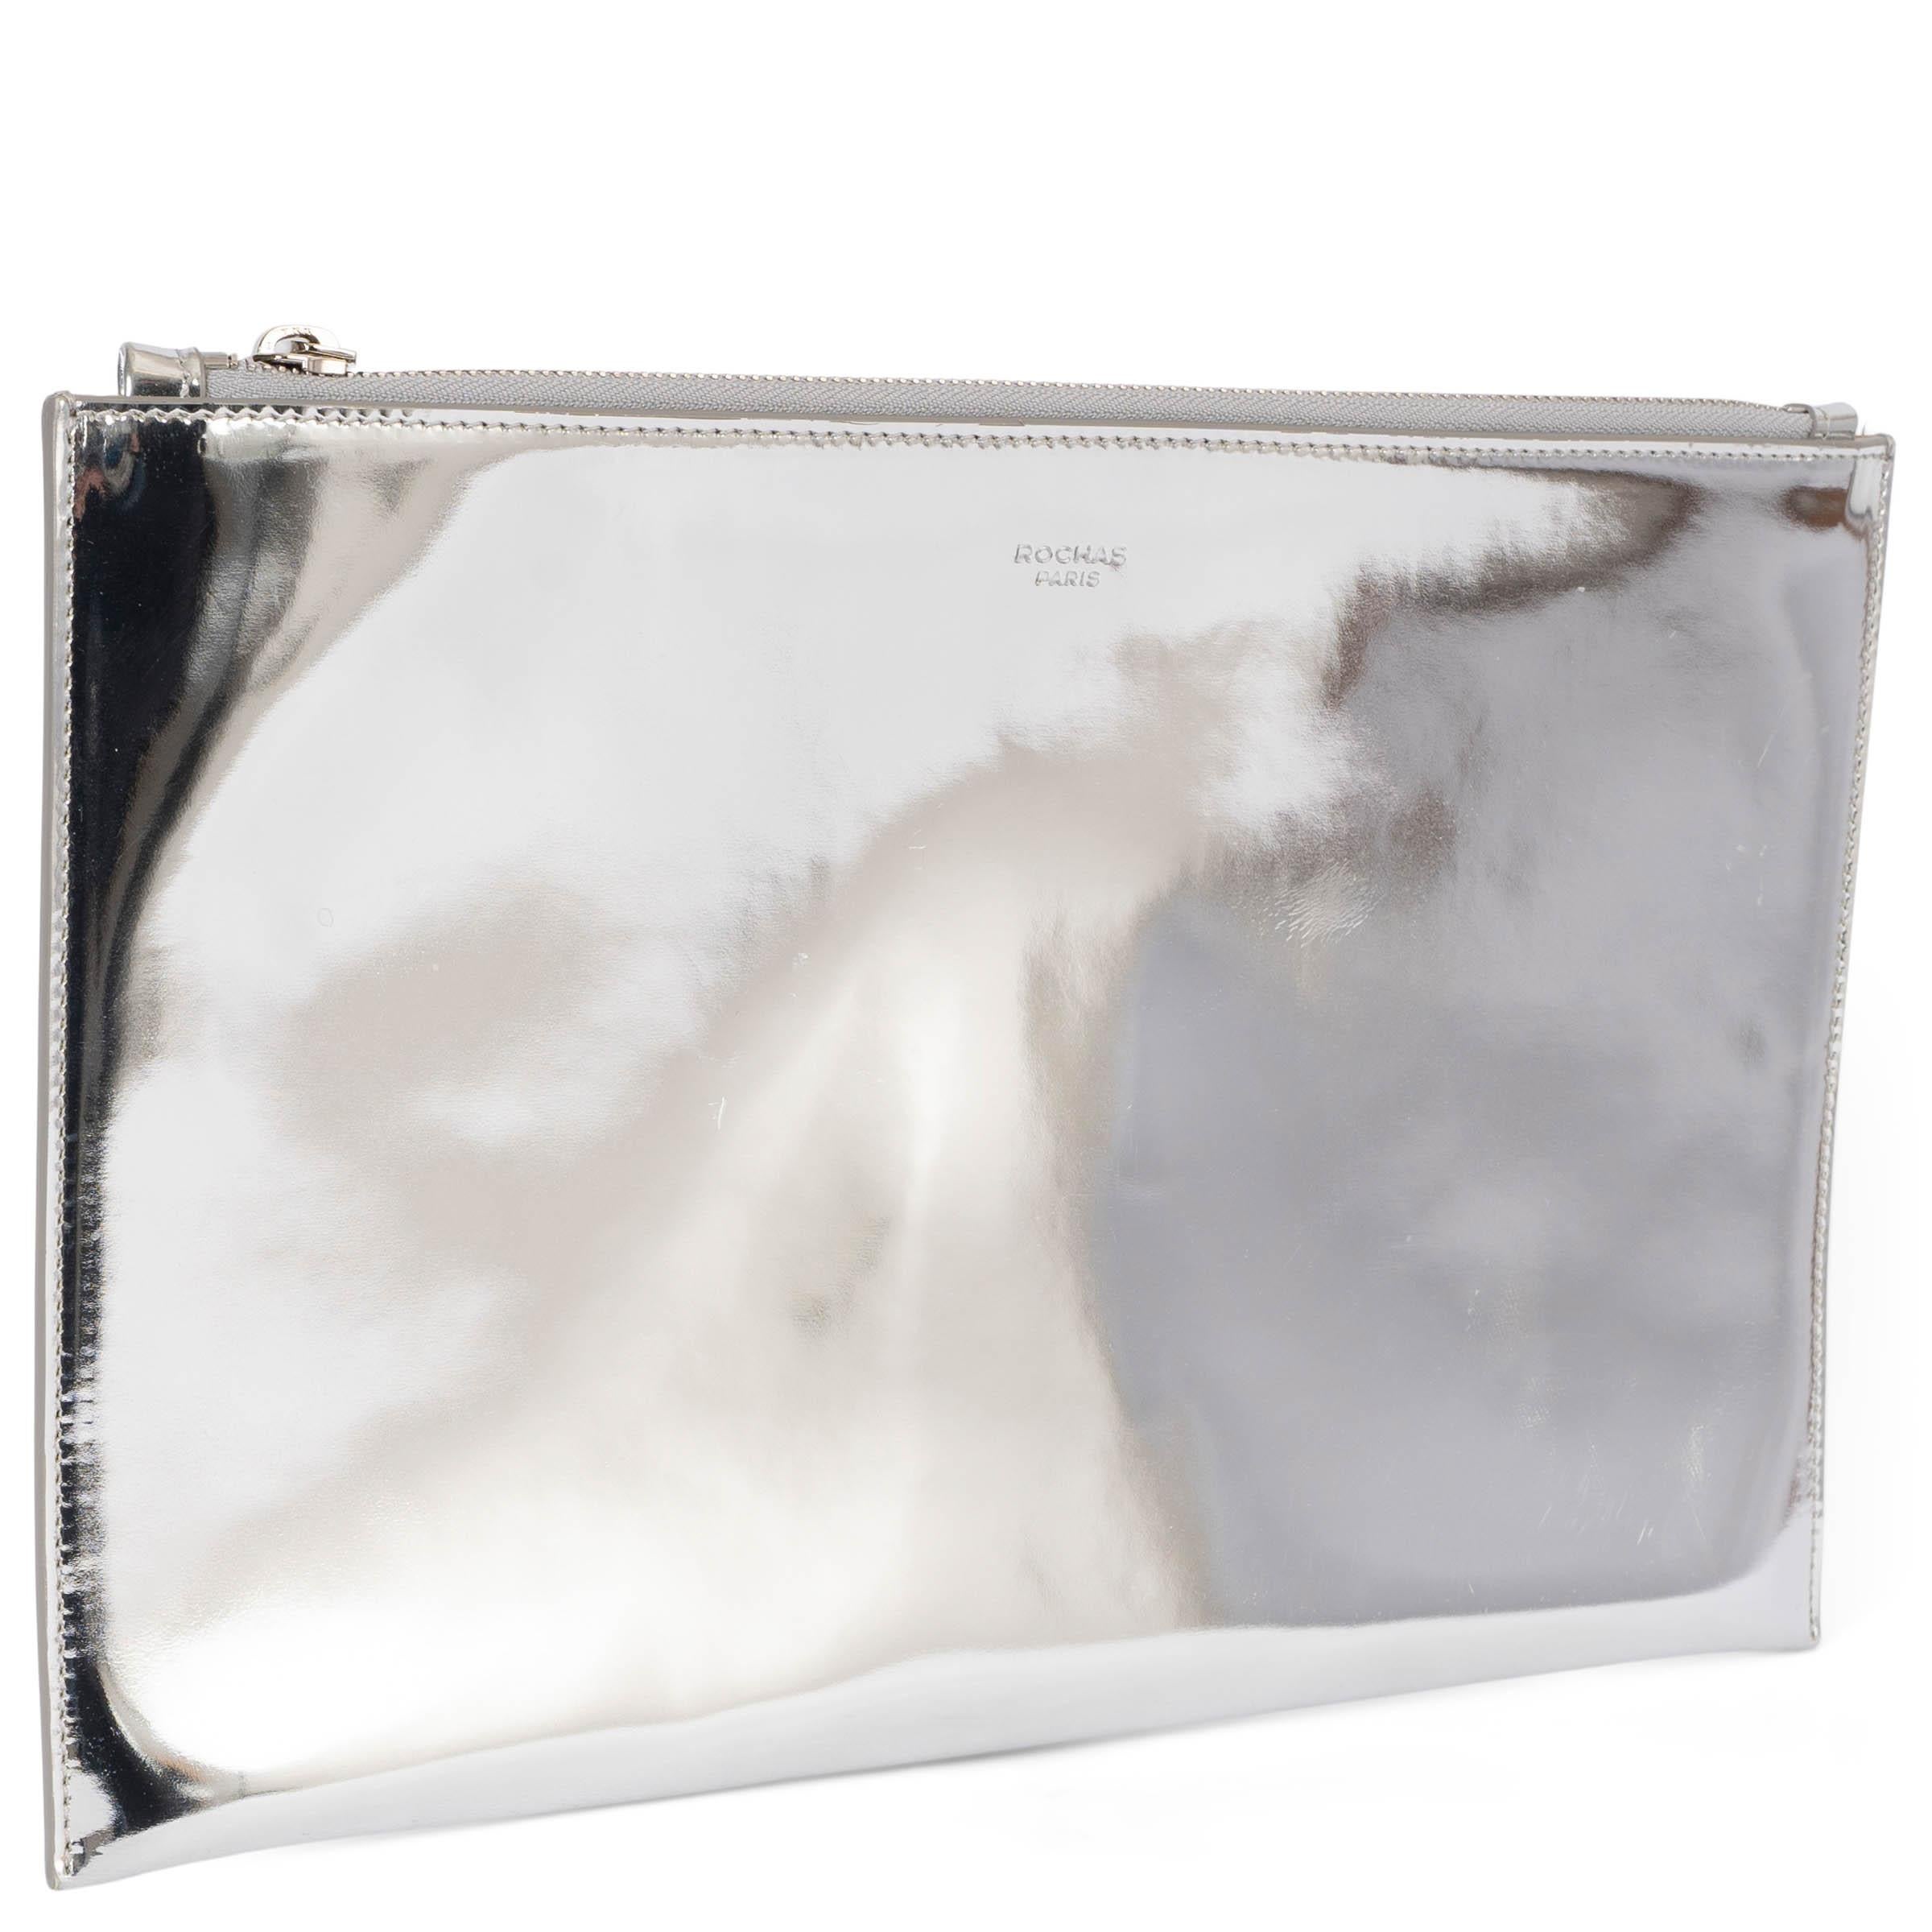 100% authentic Rochas zipper clutch in metallic silver leather. Lined in nude lambskin. Has been carried and shows a few faint scratches on the front and back. Overall in very good condition. 

Measurements
Height	20.5cm (8in)
Width	33cm